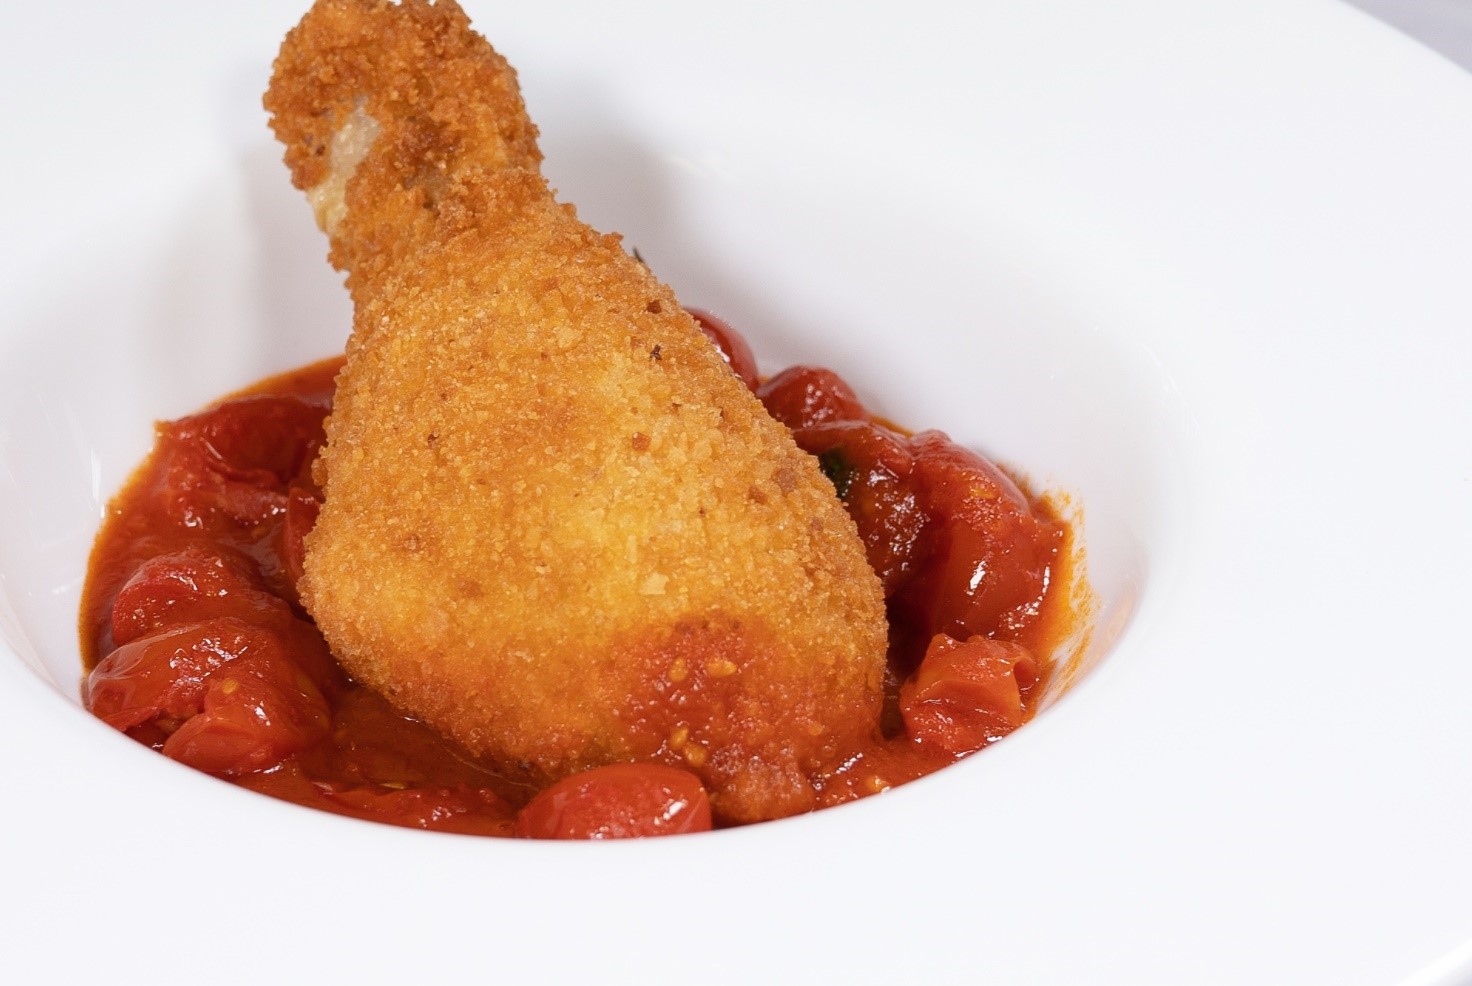 Fried chicken with spicy cherry tomato sauce